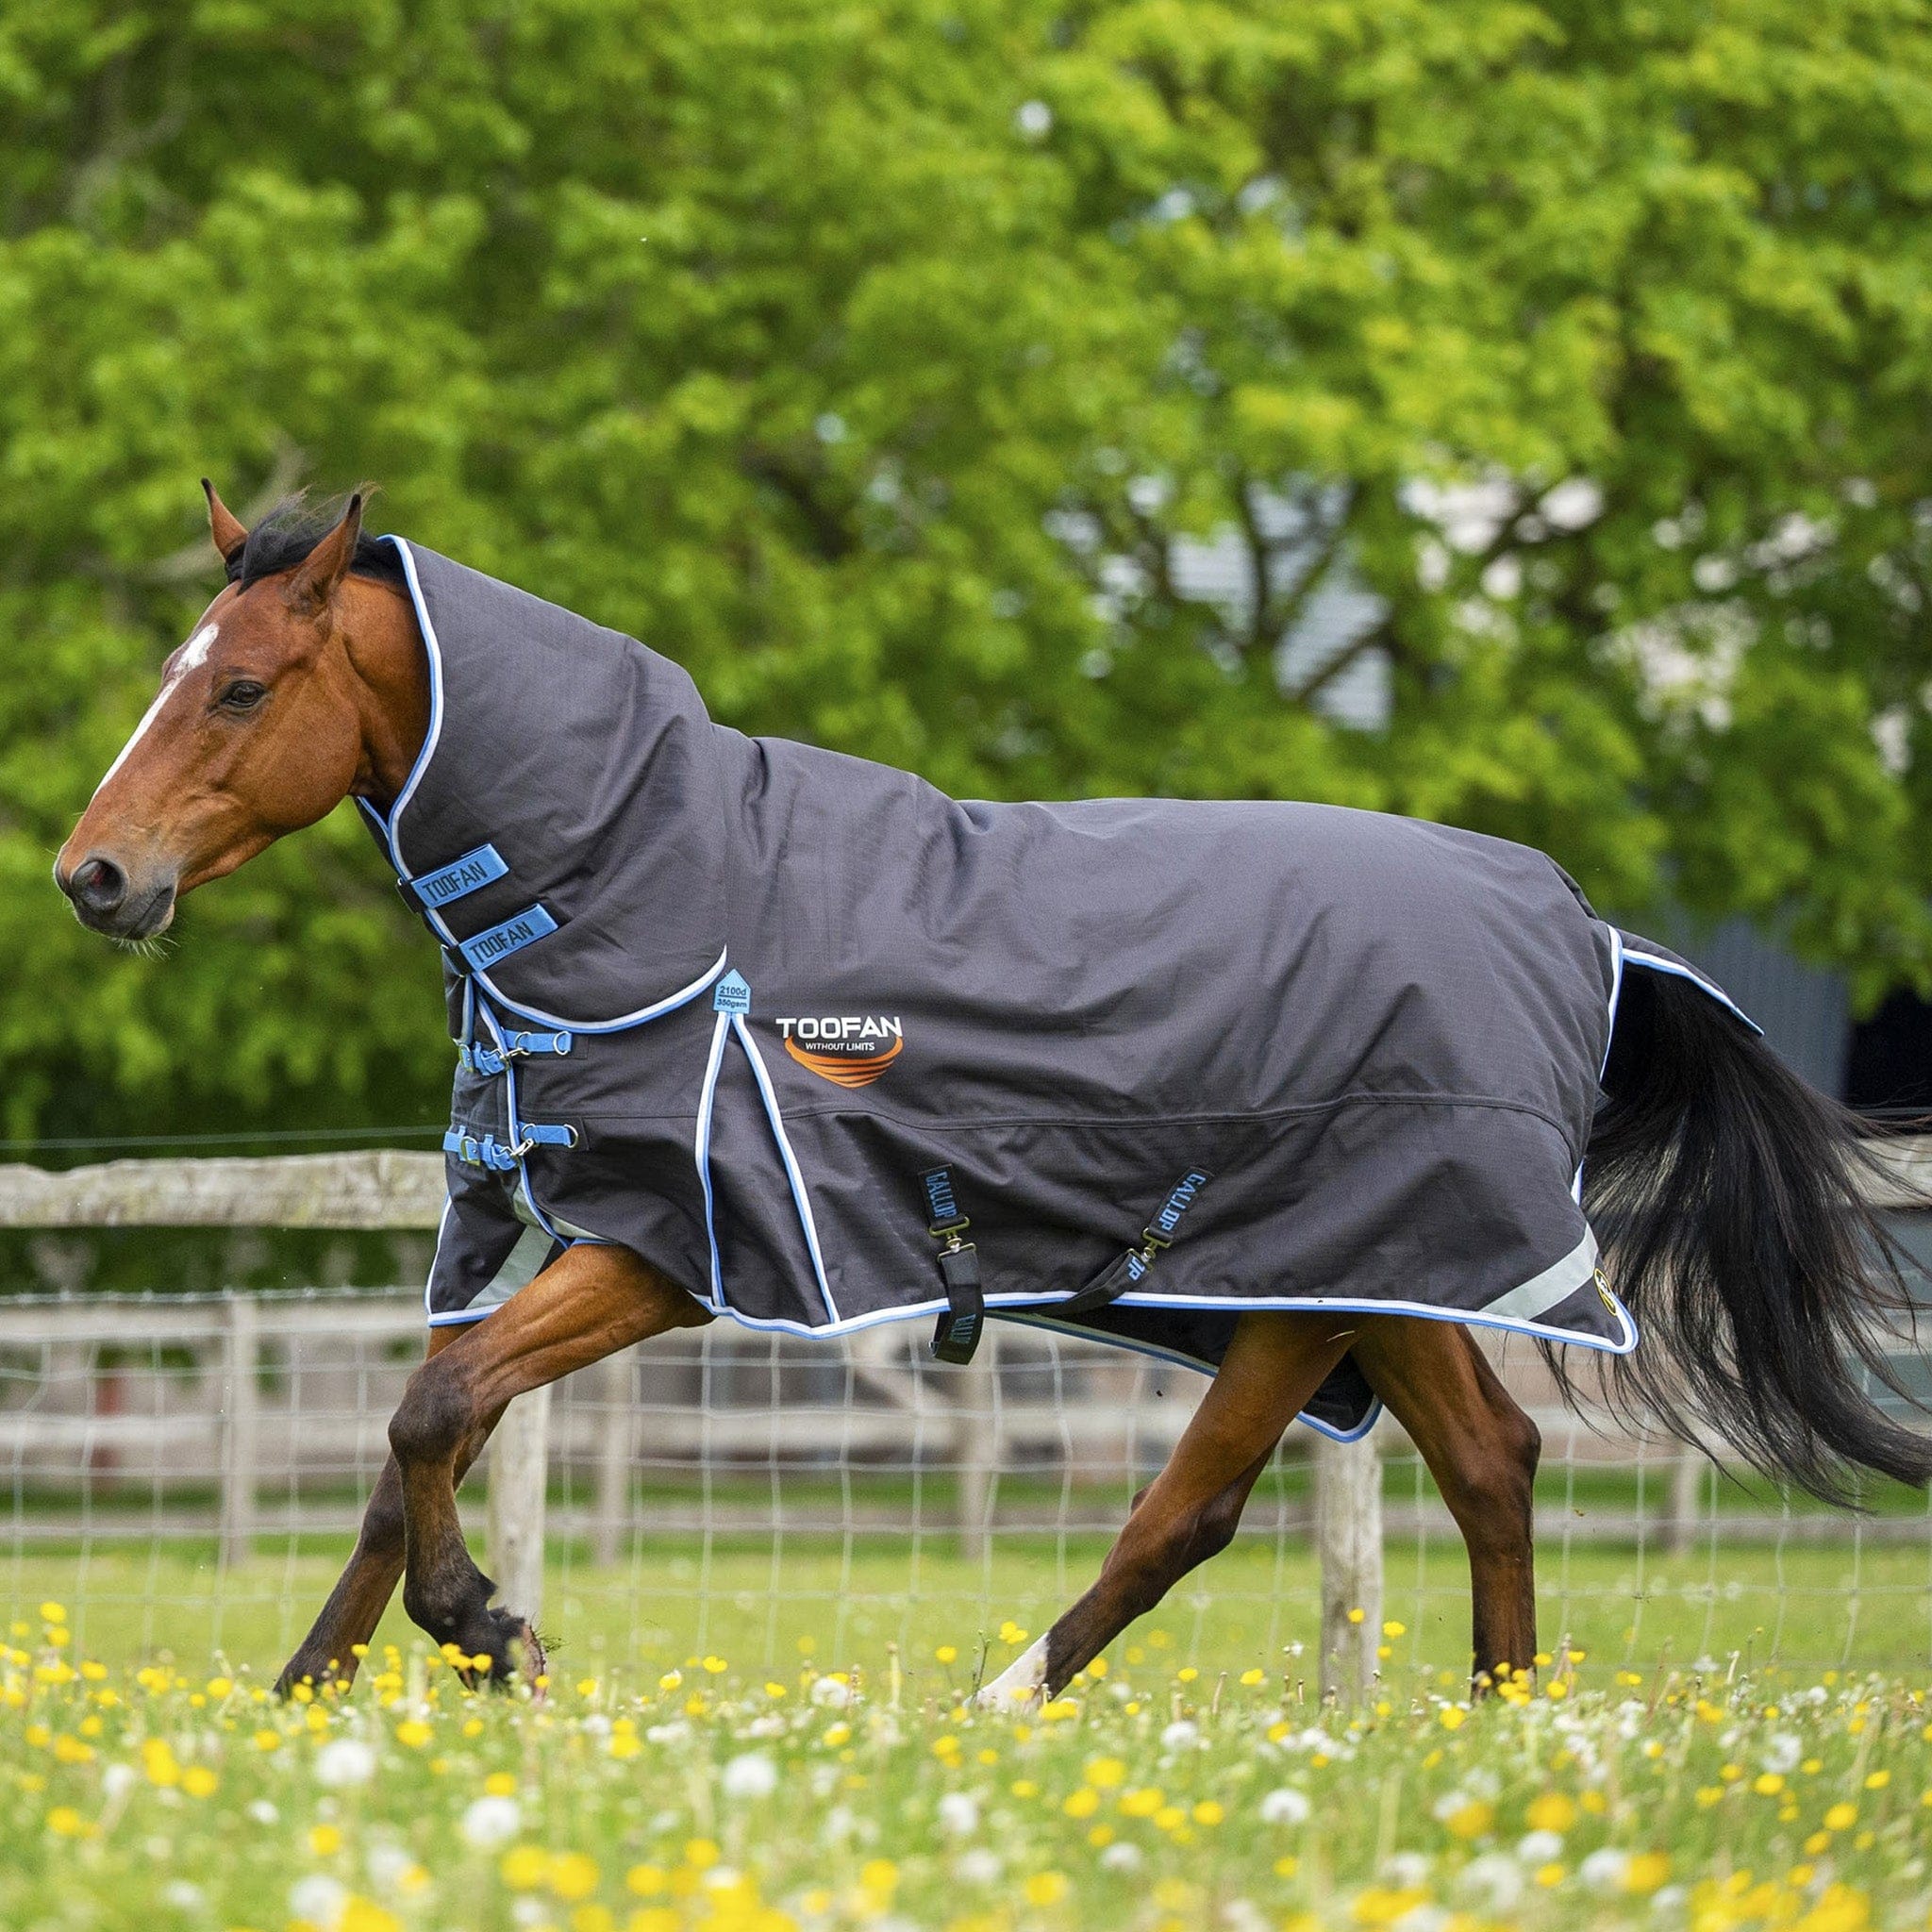 Gallop Toofan Heavyweight 350g Combo Neck Turnout Rug Charcoal 2-789